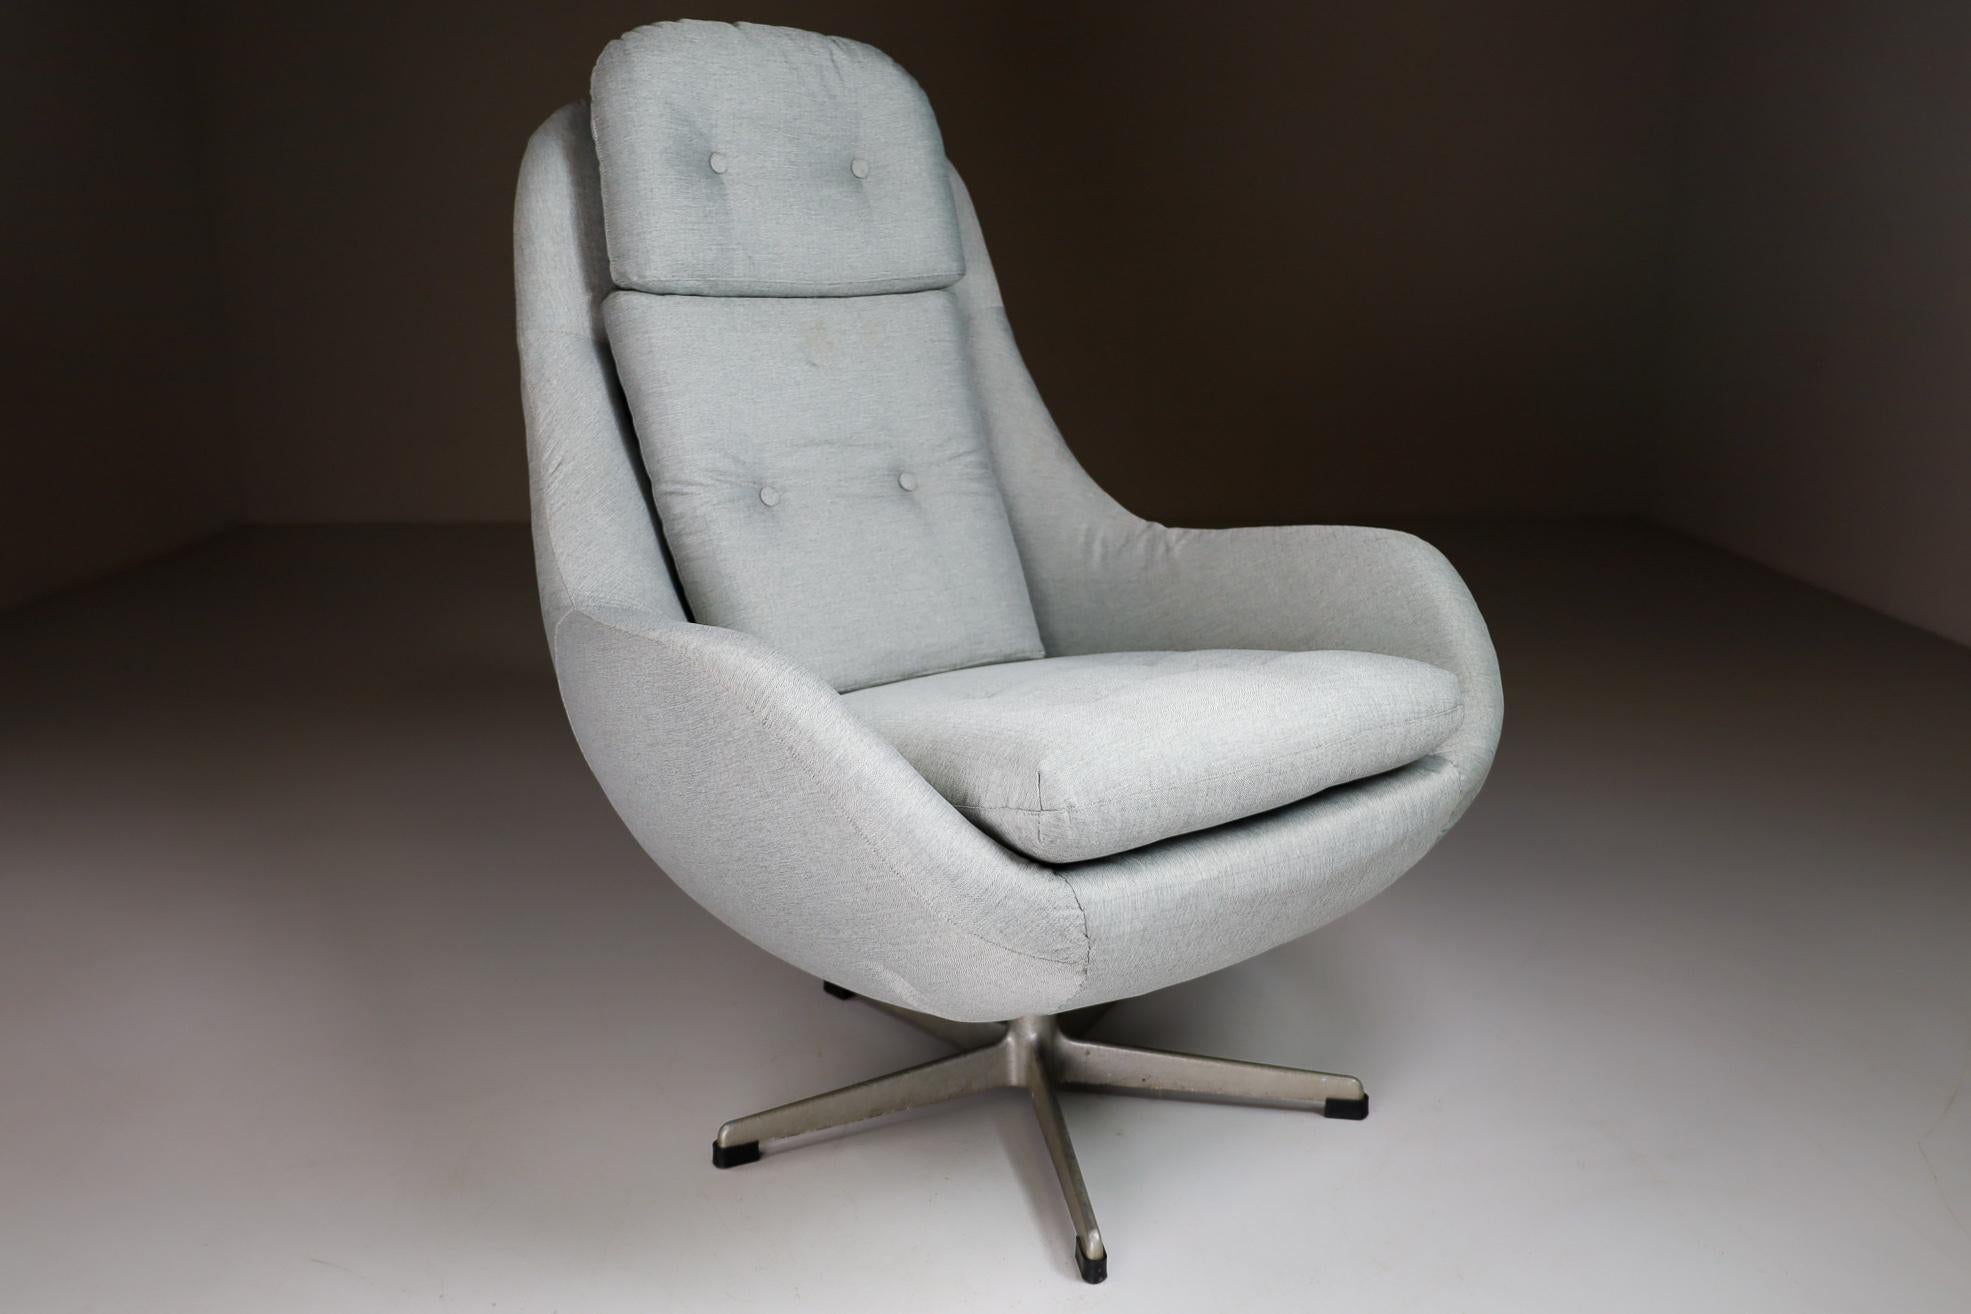 Midcentury Swivel Chair in New Reupholstered Fabric, Czech Republic 1970 For Sale 1